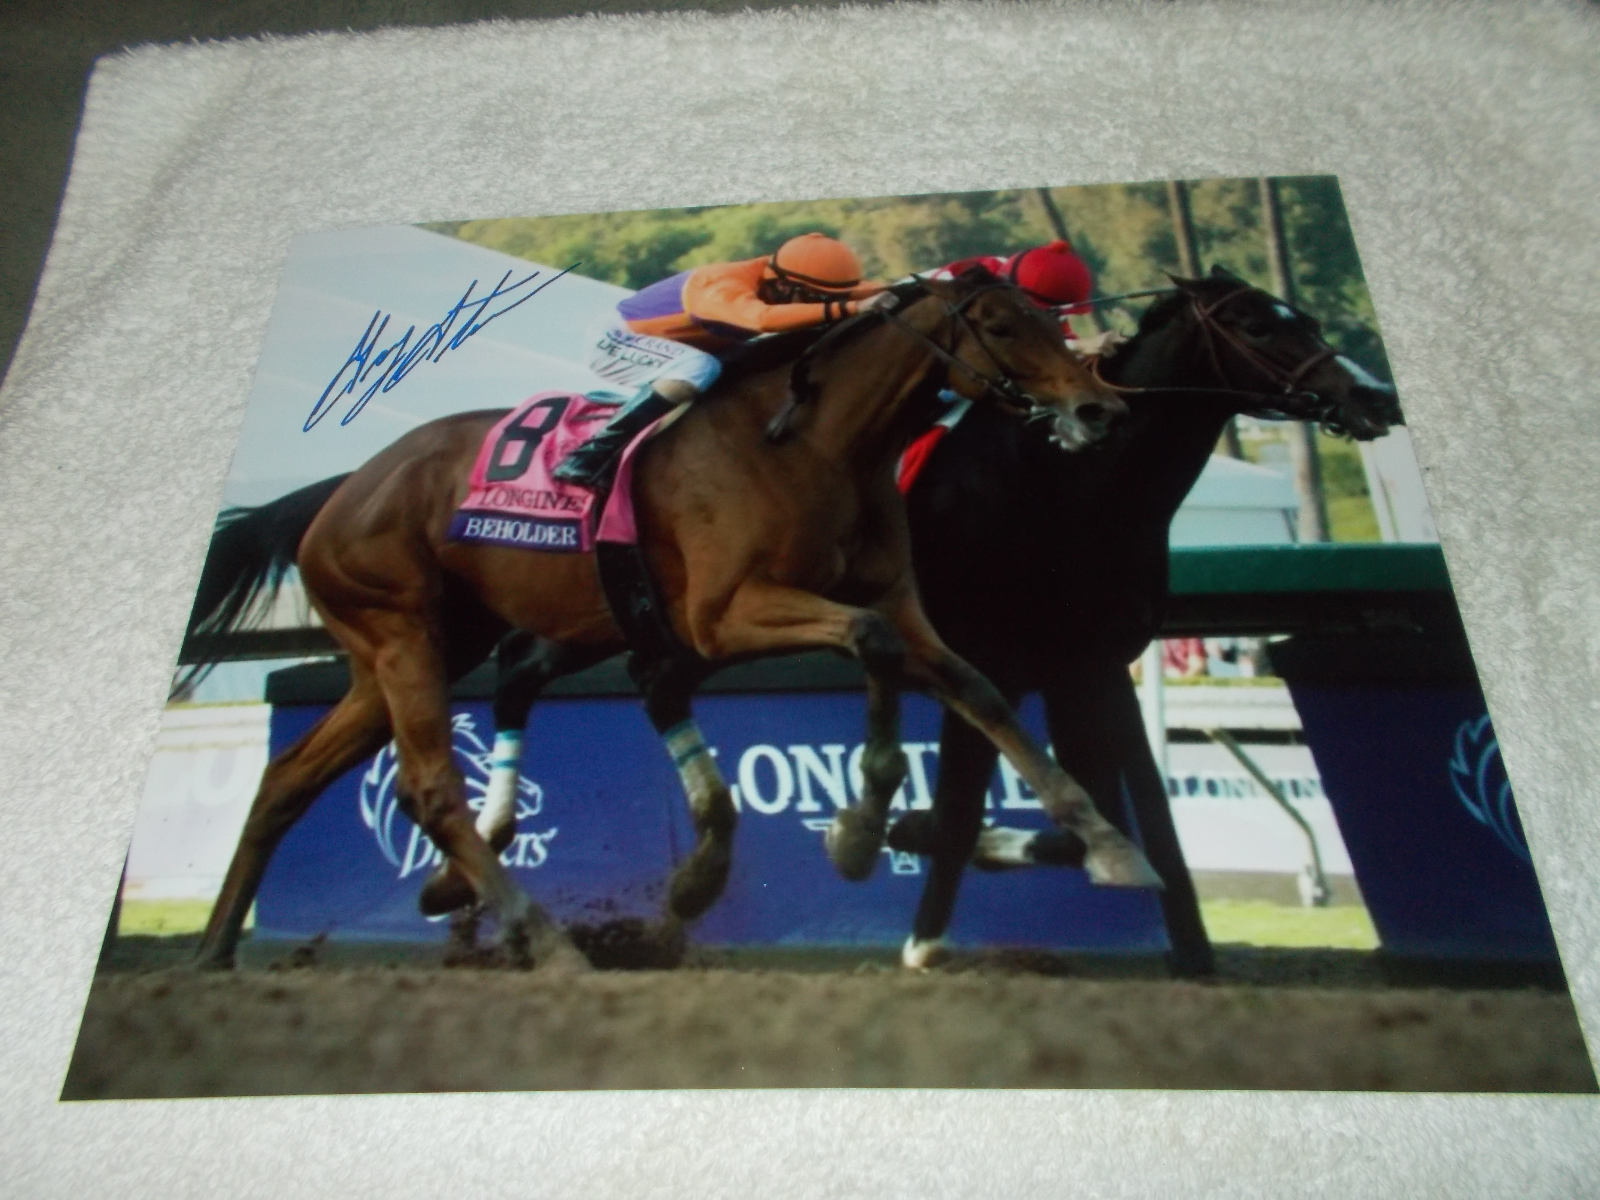 GARY STEVENS BEHOLDER 2012 BREEDERS CUP SIGNED 8x10 HORSE RACING Photo Poster painting